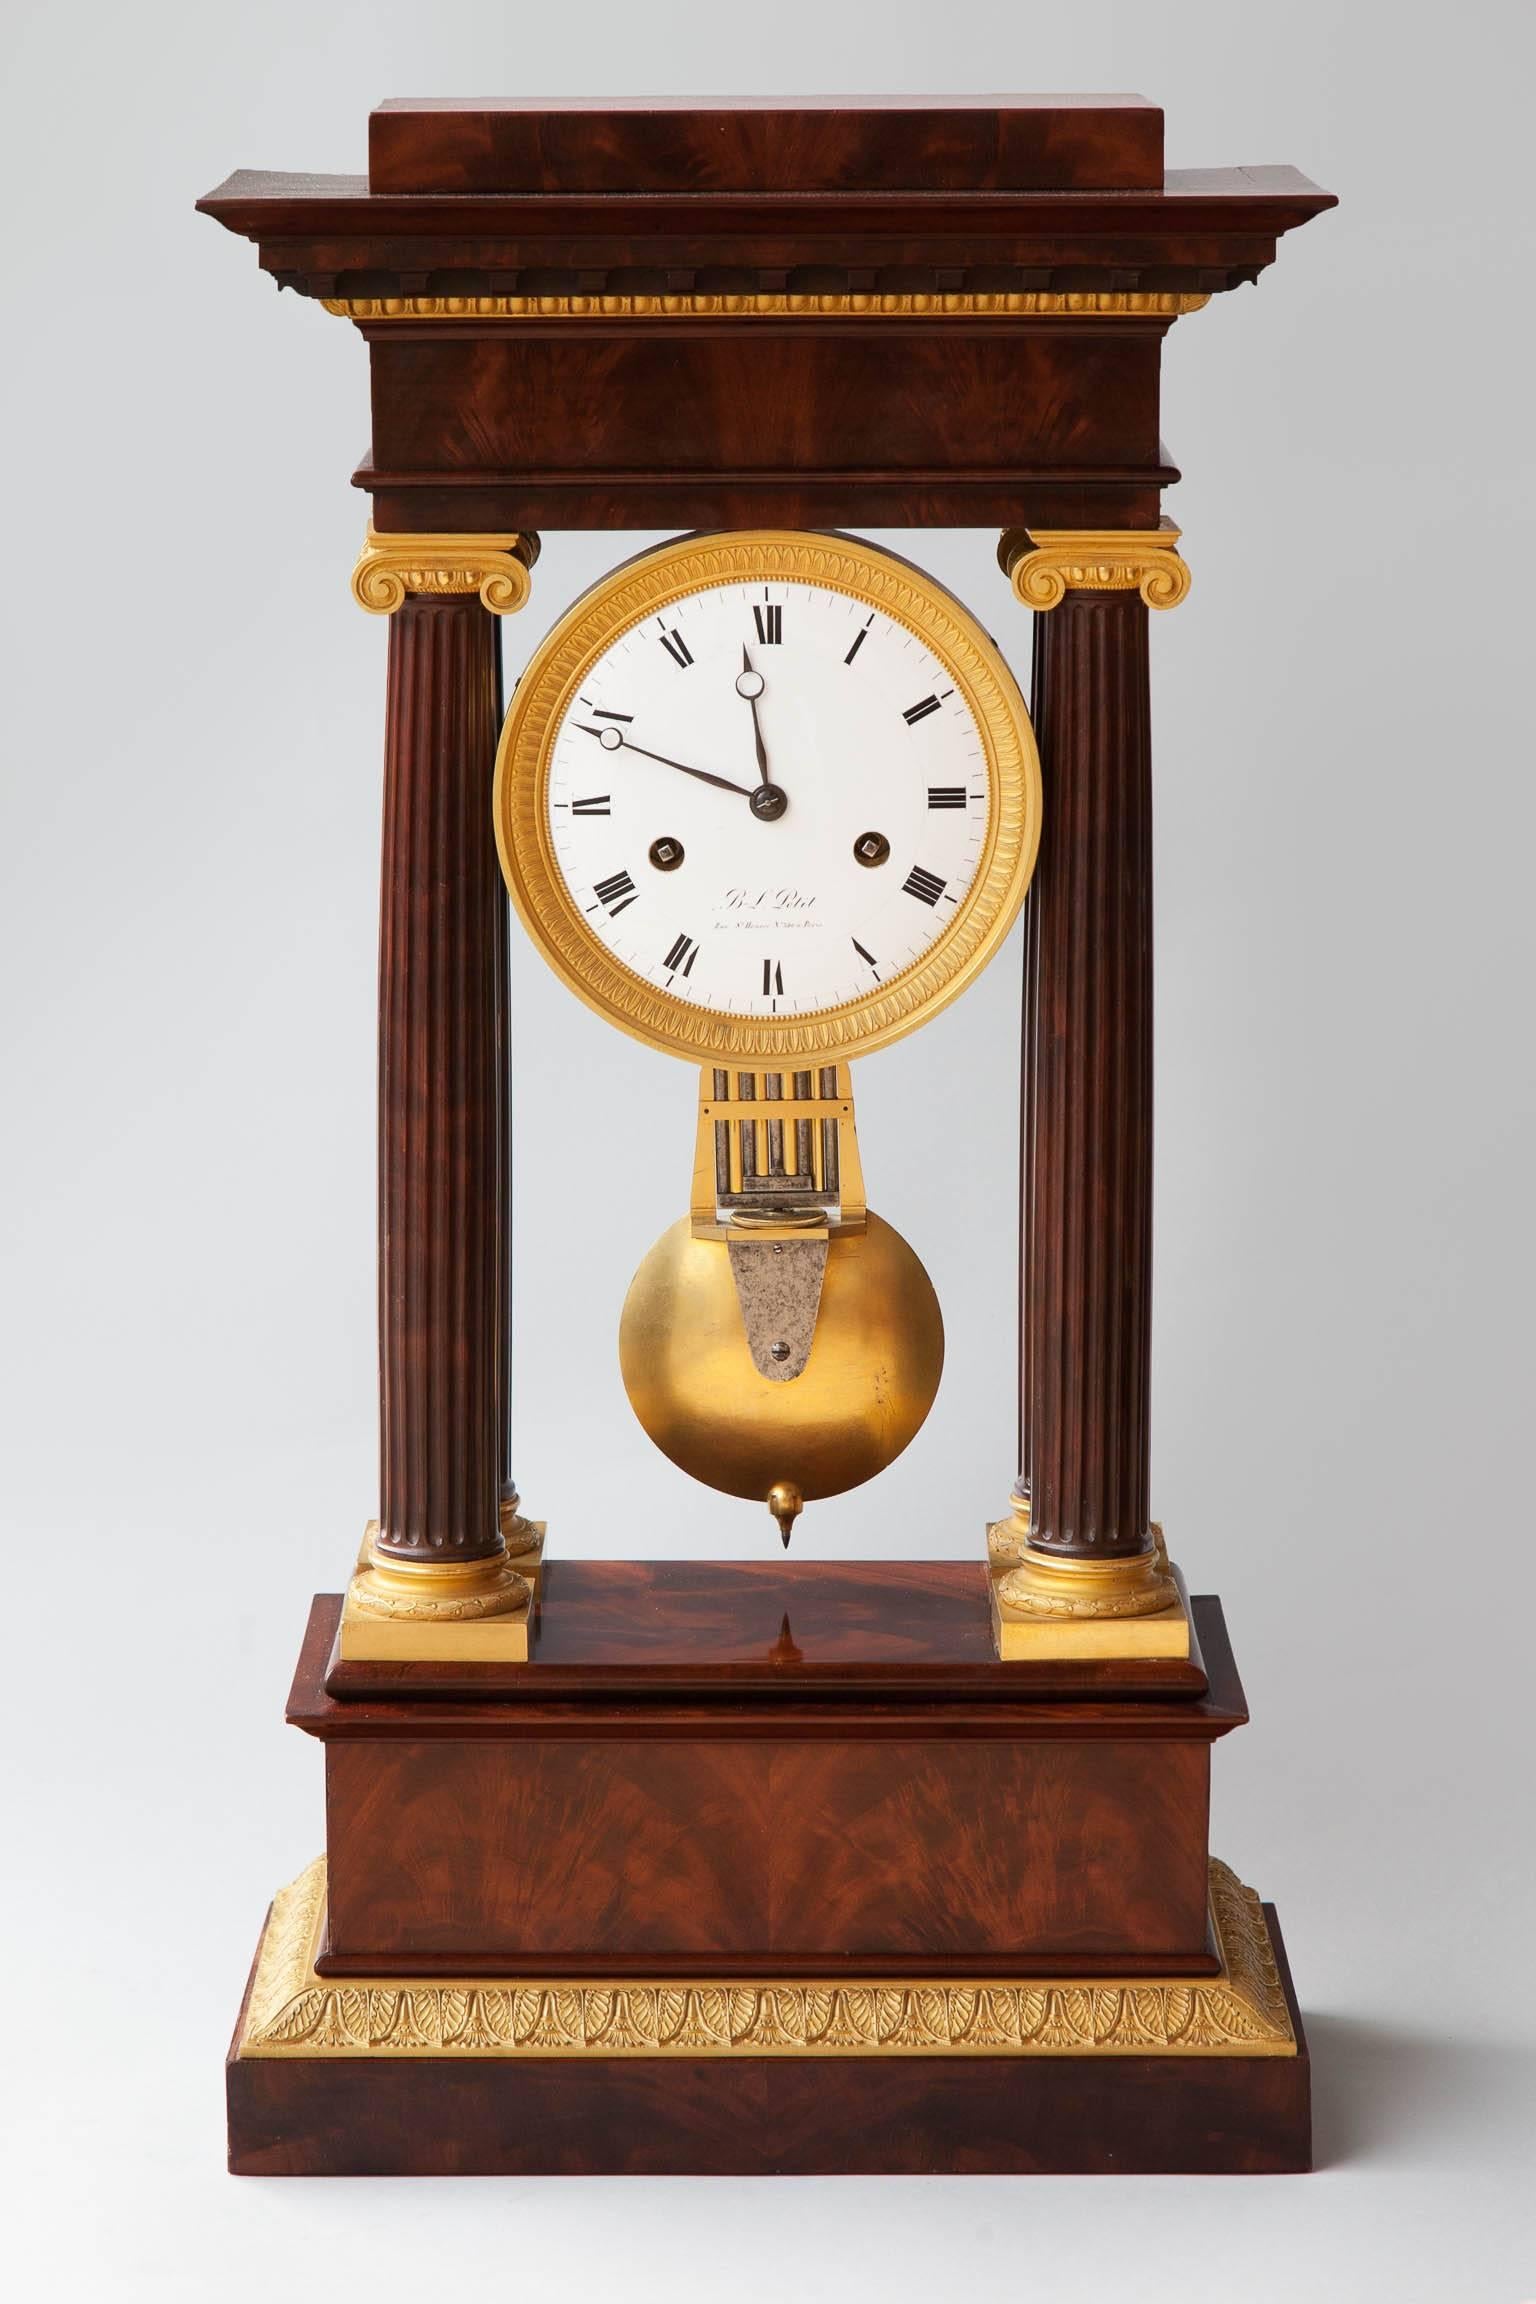 Two train movement count wheel striking on a bell, with chiming on the hour and half-hour. Flame mahogany veneered case with supported by four mahogany Ionic columns and mounted with finely incised gilt bronze mounts. 
The enamel clock face in